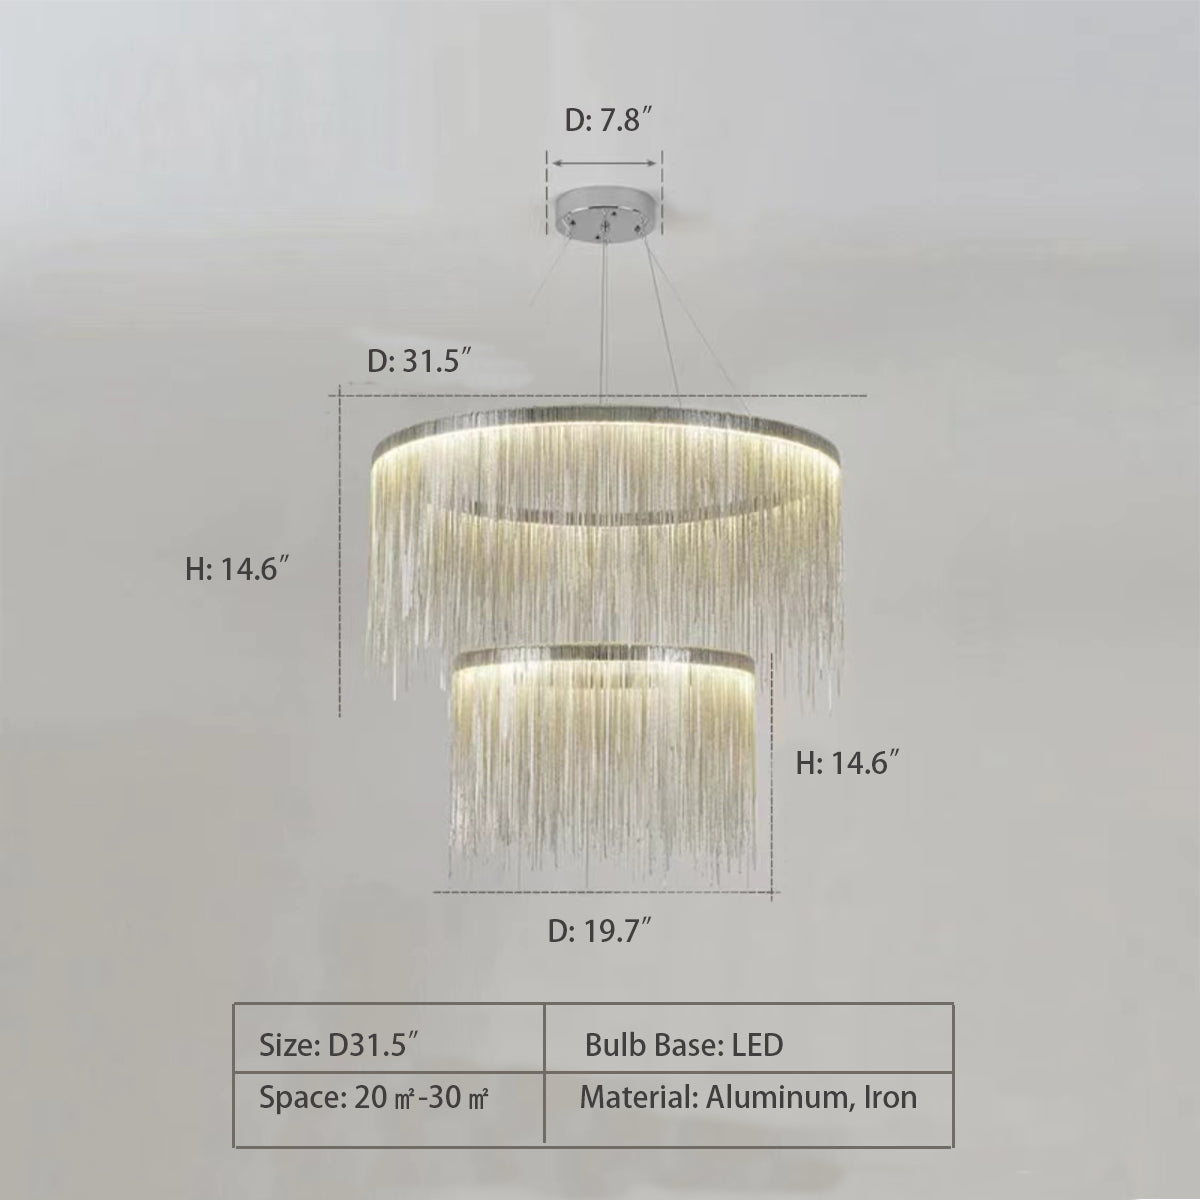 2 Layers: D31.5" String Light Chandelier - Round,chandelier,chandeliers,tassel,pendant,aluminum,round,classic,two layers,2 layers,big,huge,large,oversized,chain,living room,dining room,duplex,loft